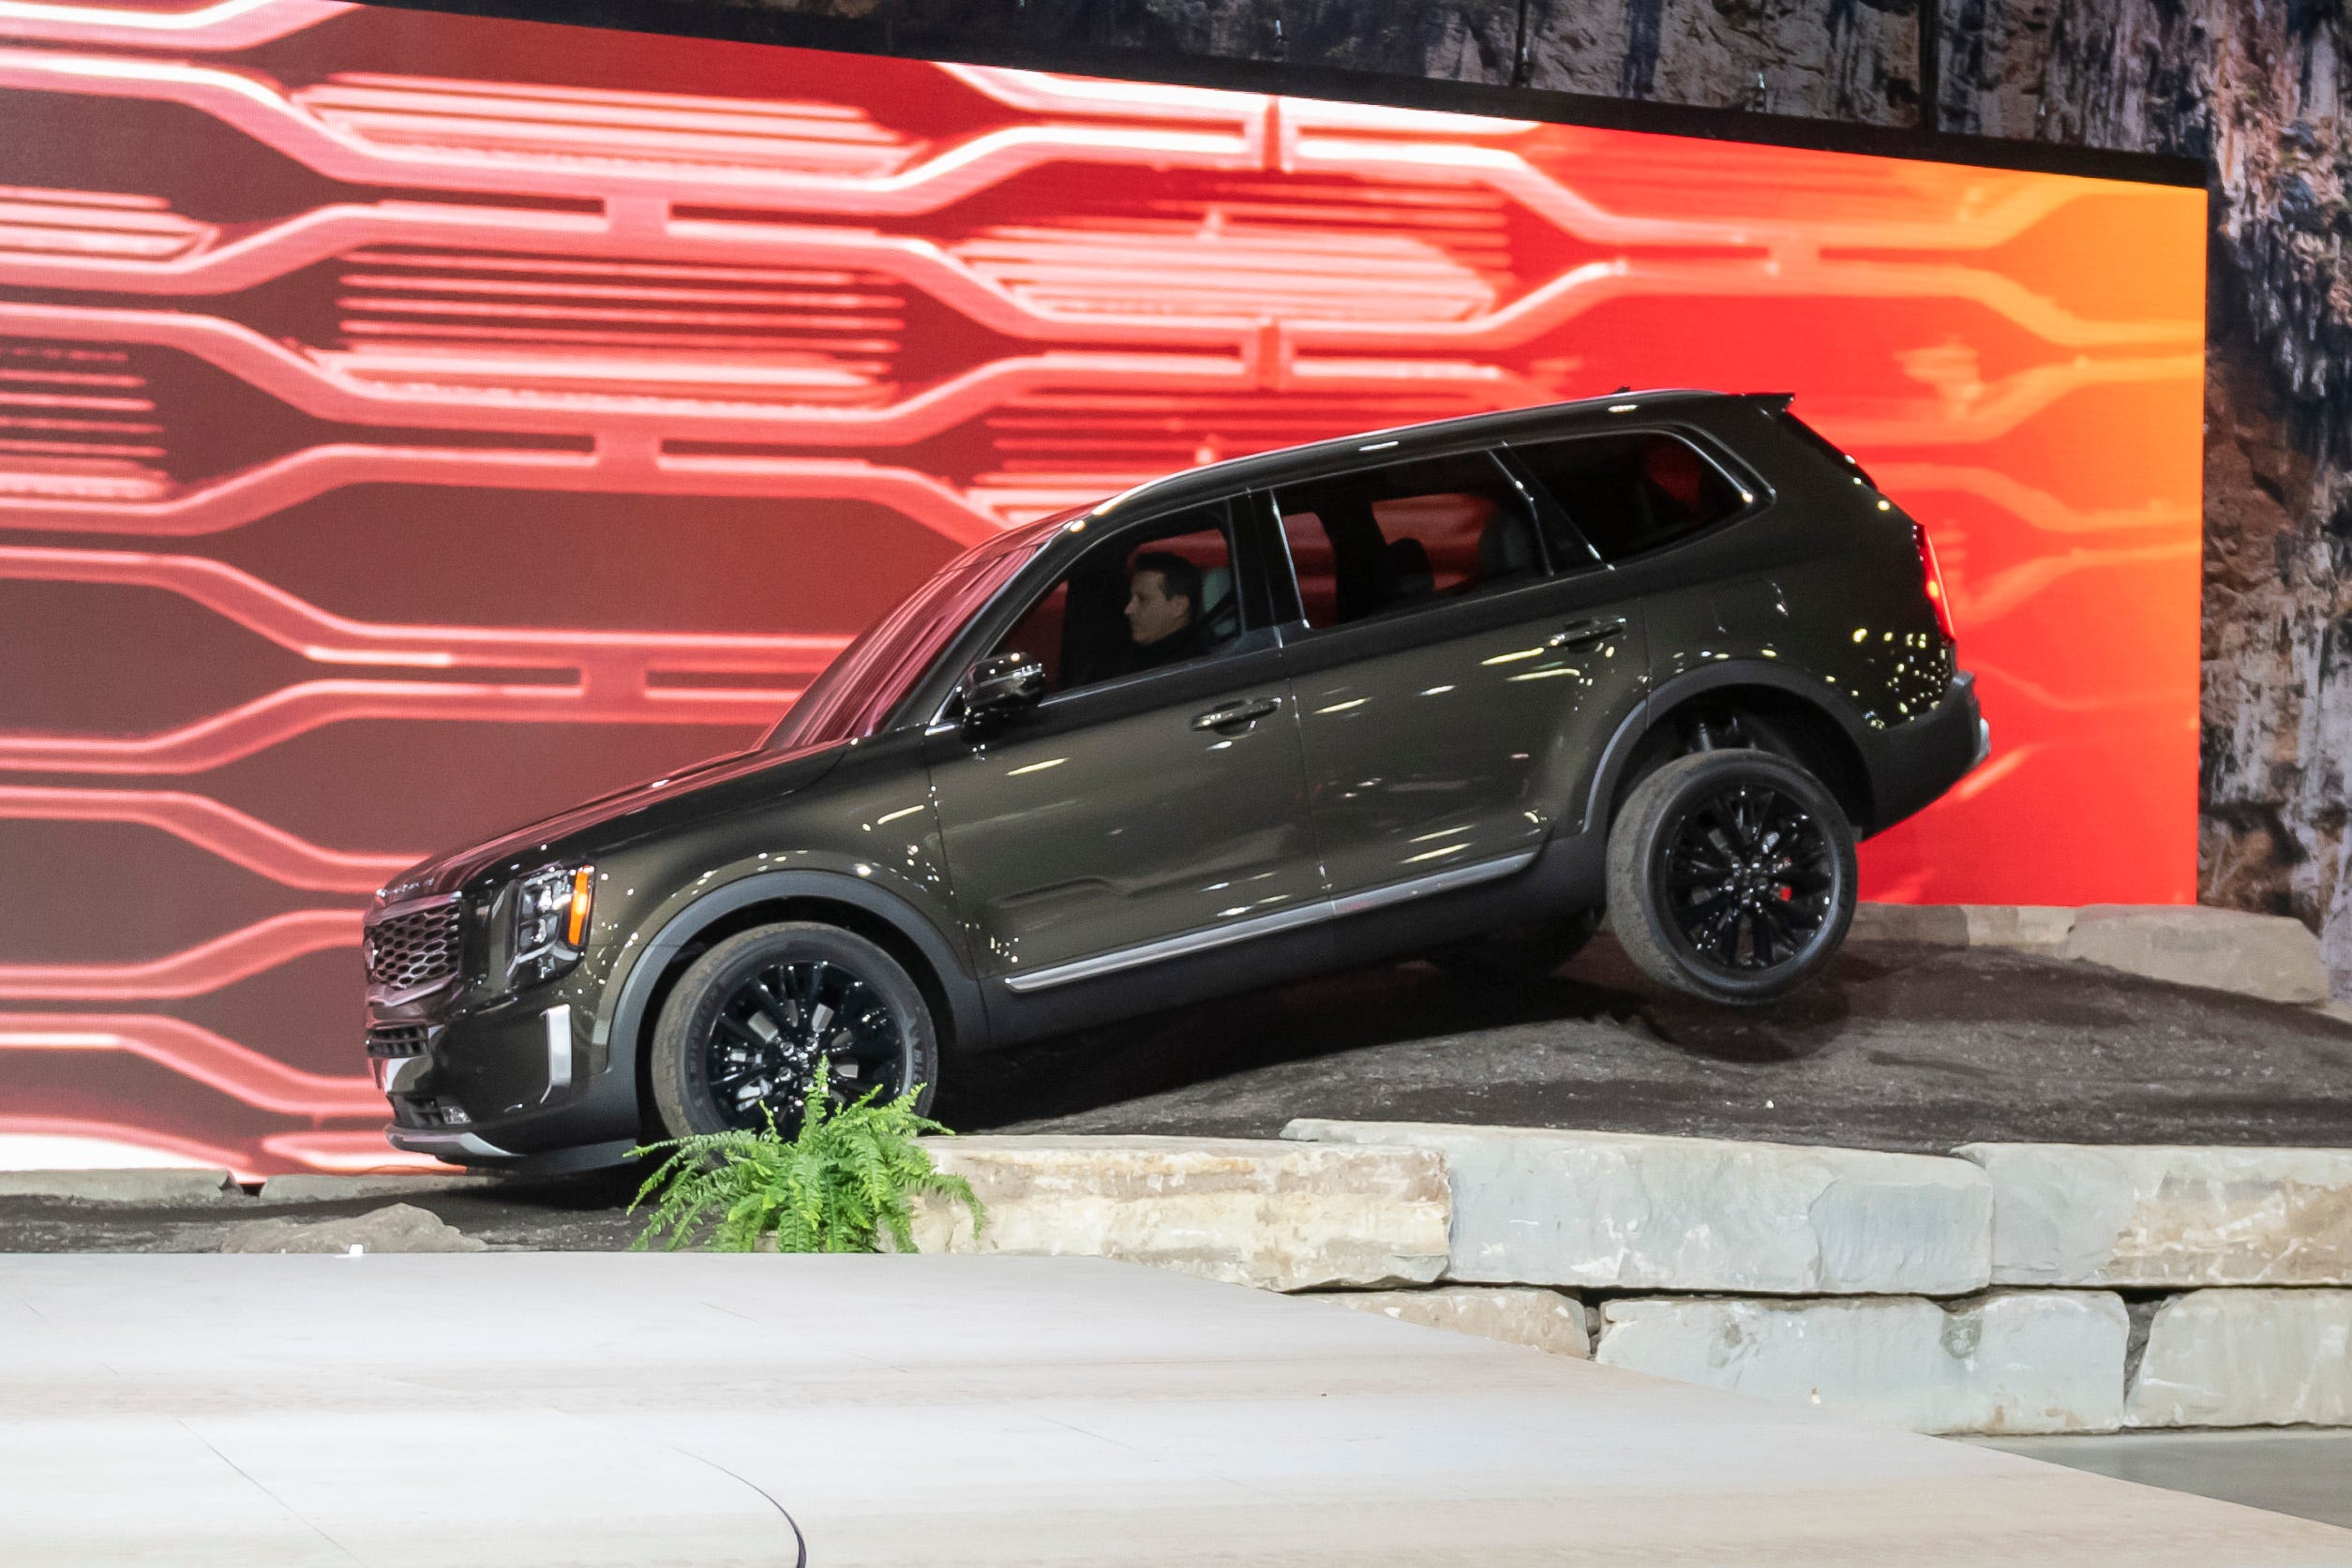 The 2020 Kia Telluride is driven on an off-road road course during its reveal at the North American International Auto Show at Cobo Center in Detroit, Jan. 14, 2019.